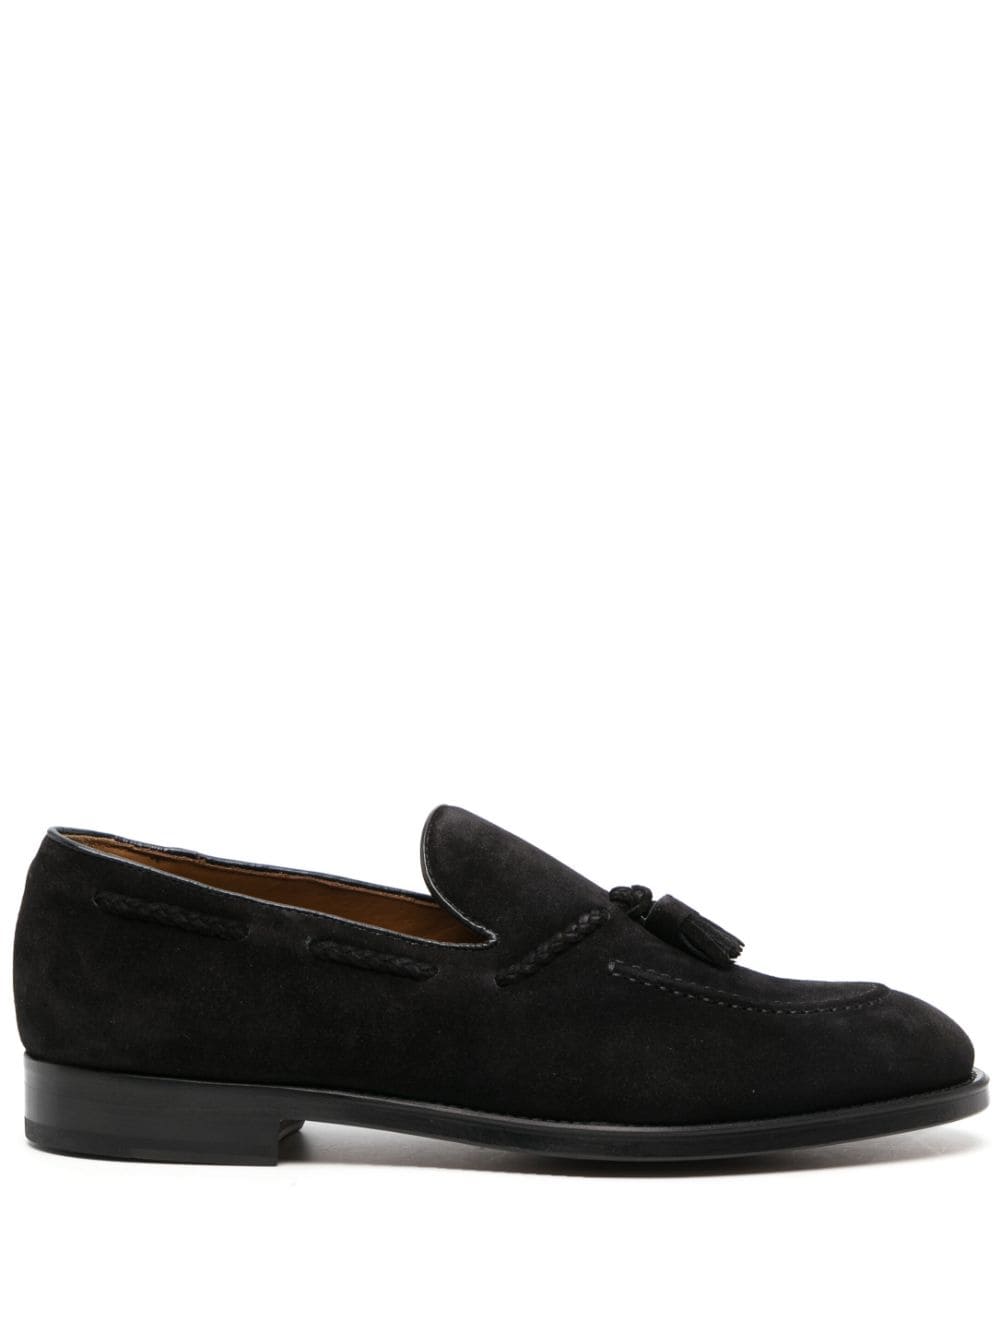 Doucal's tassel-detail calf-suede loafers - Black von Doucal's